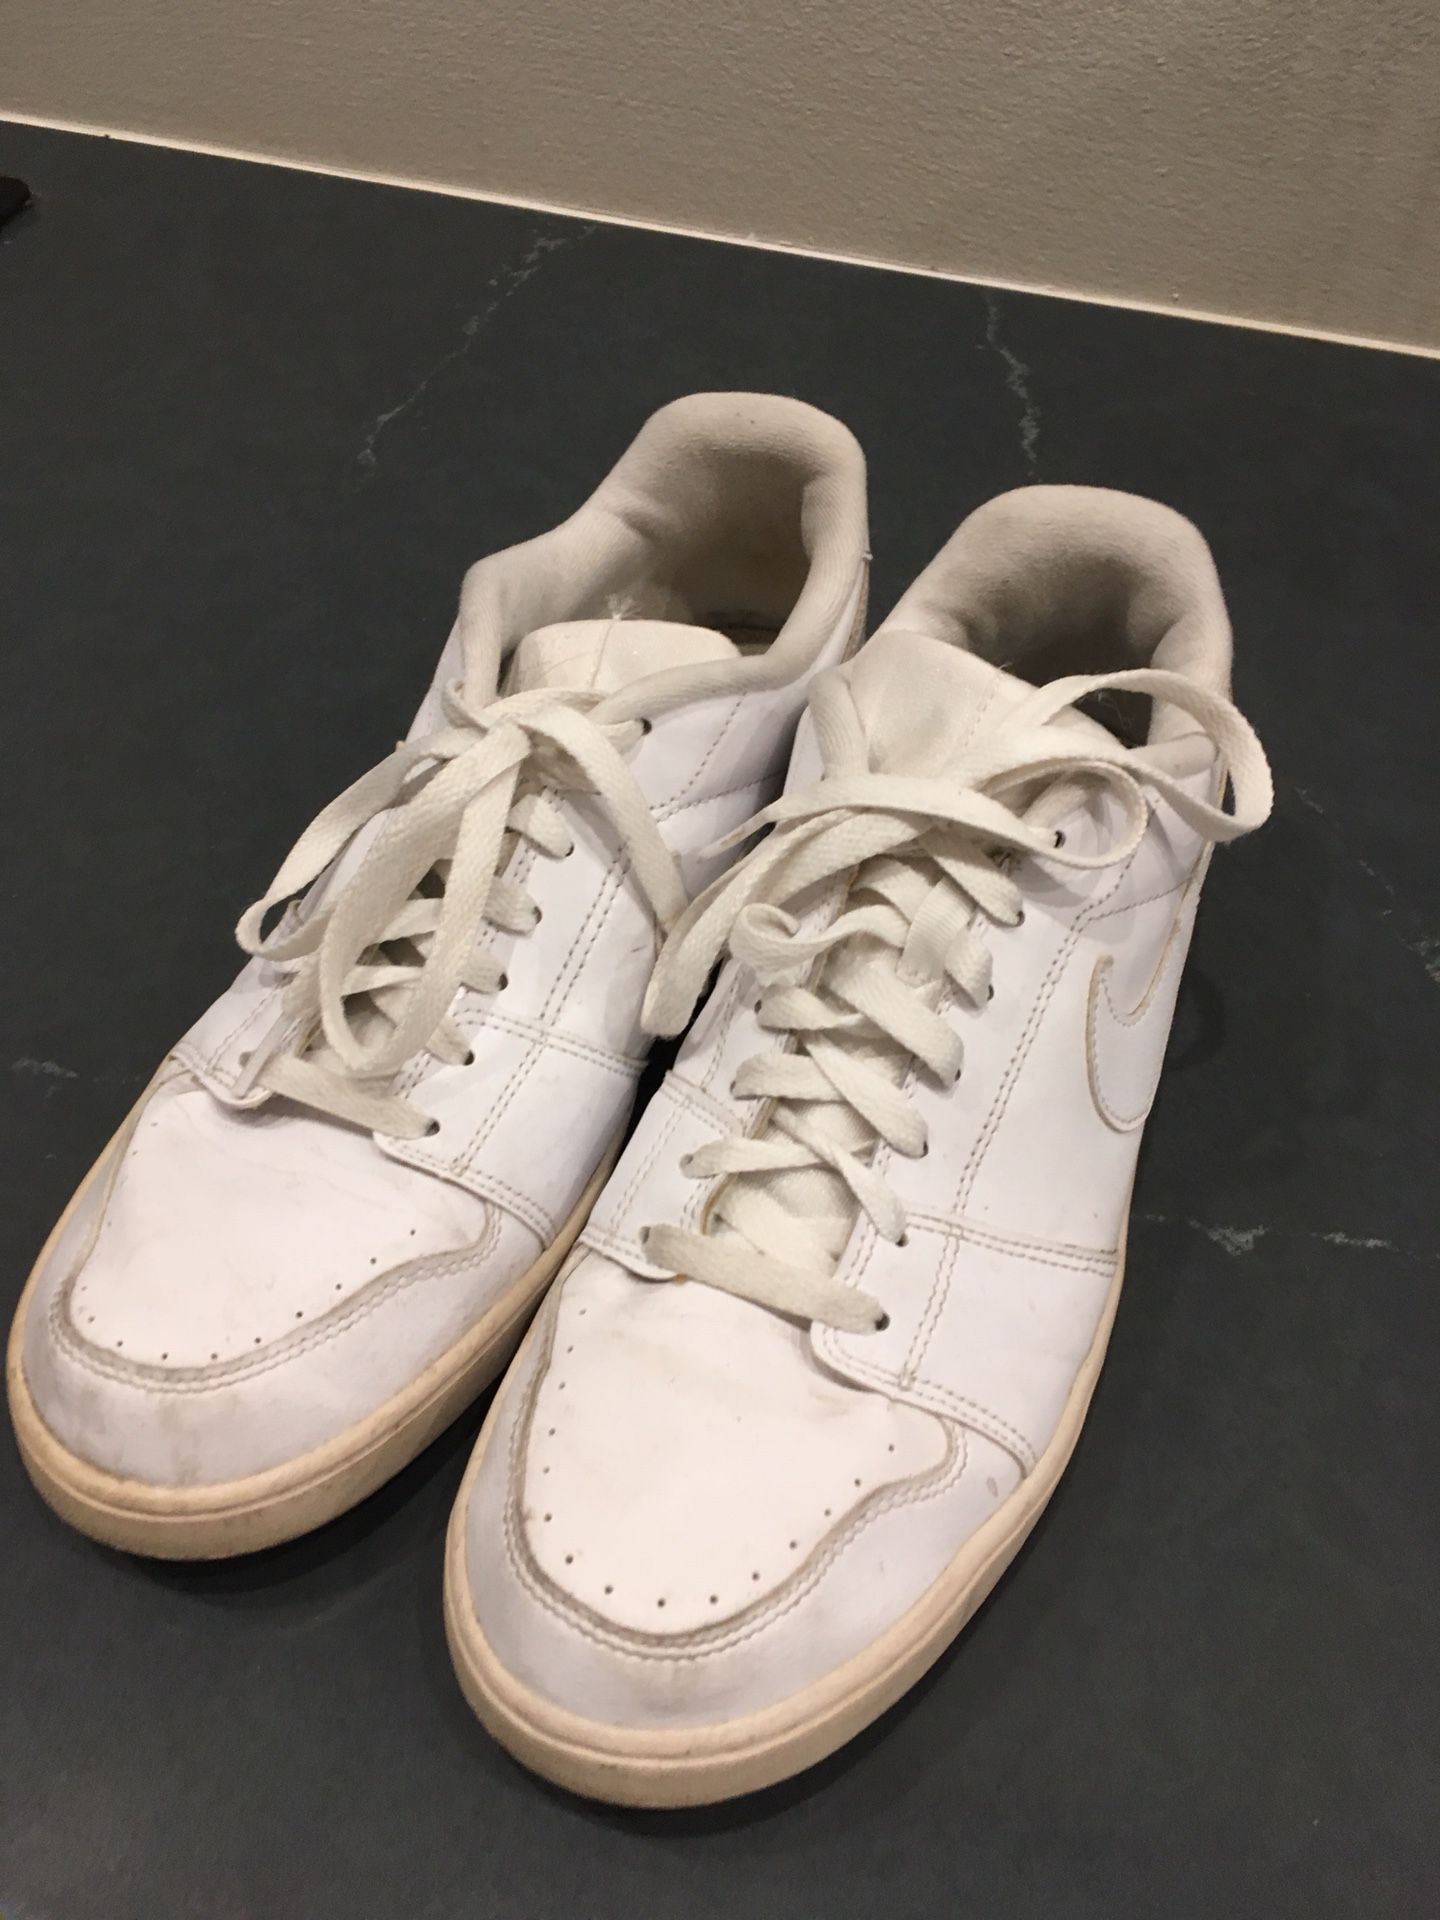 Nike white men’s tennis shoes size 10.5 for Sale in West Palm Beach, FL ...